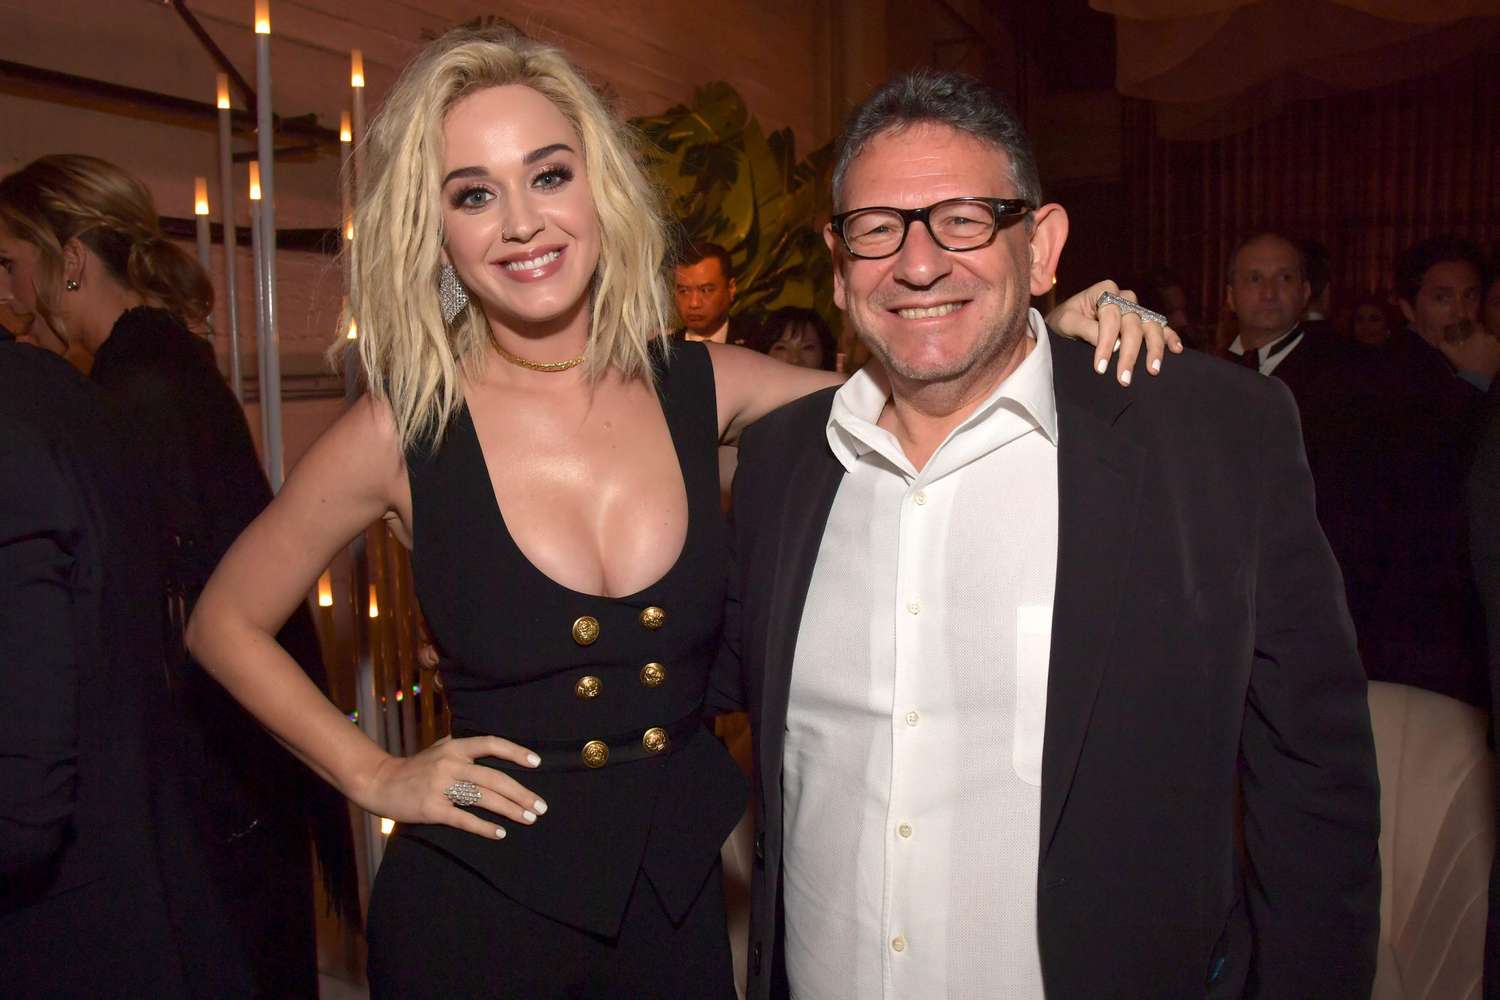 Katy Perry and Chief Executive Officer of Universal Music Group Lucian Grainge at the&nbsp;Universal Music Group 2017 Grammy After Party